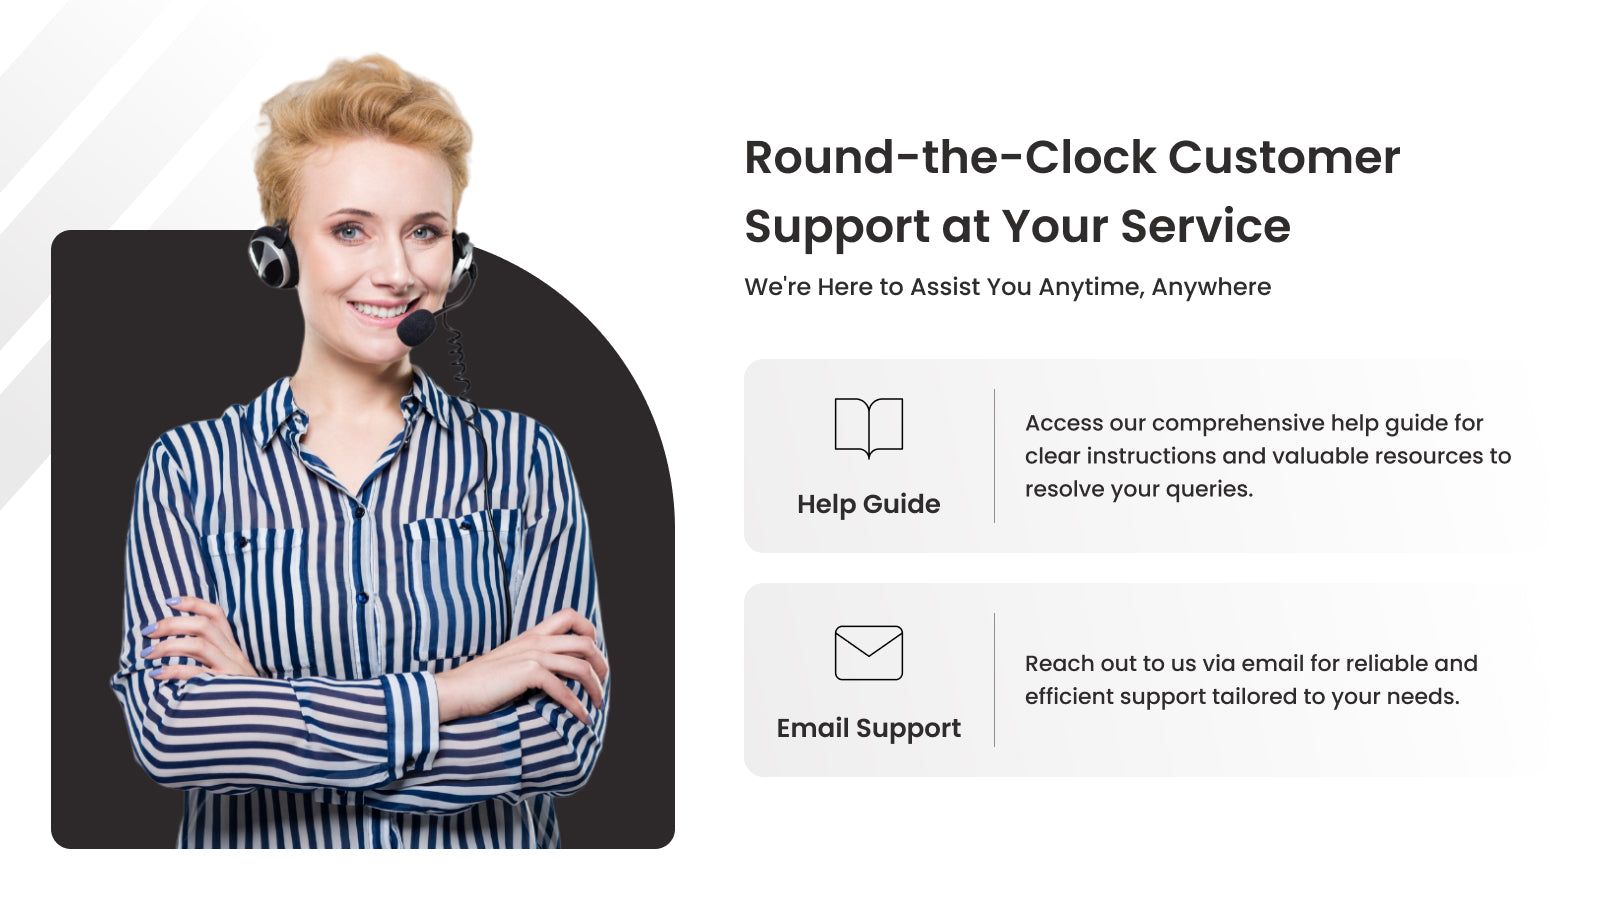 Round-the-clock Customer Support at your Service.